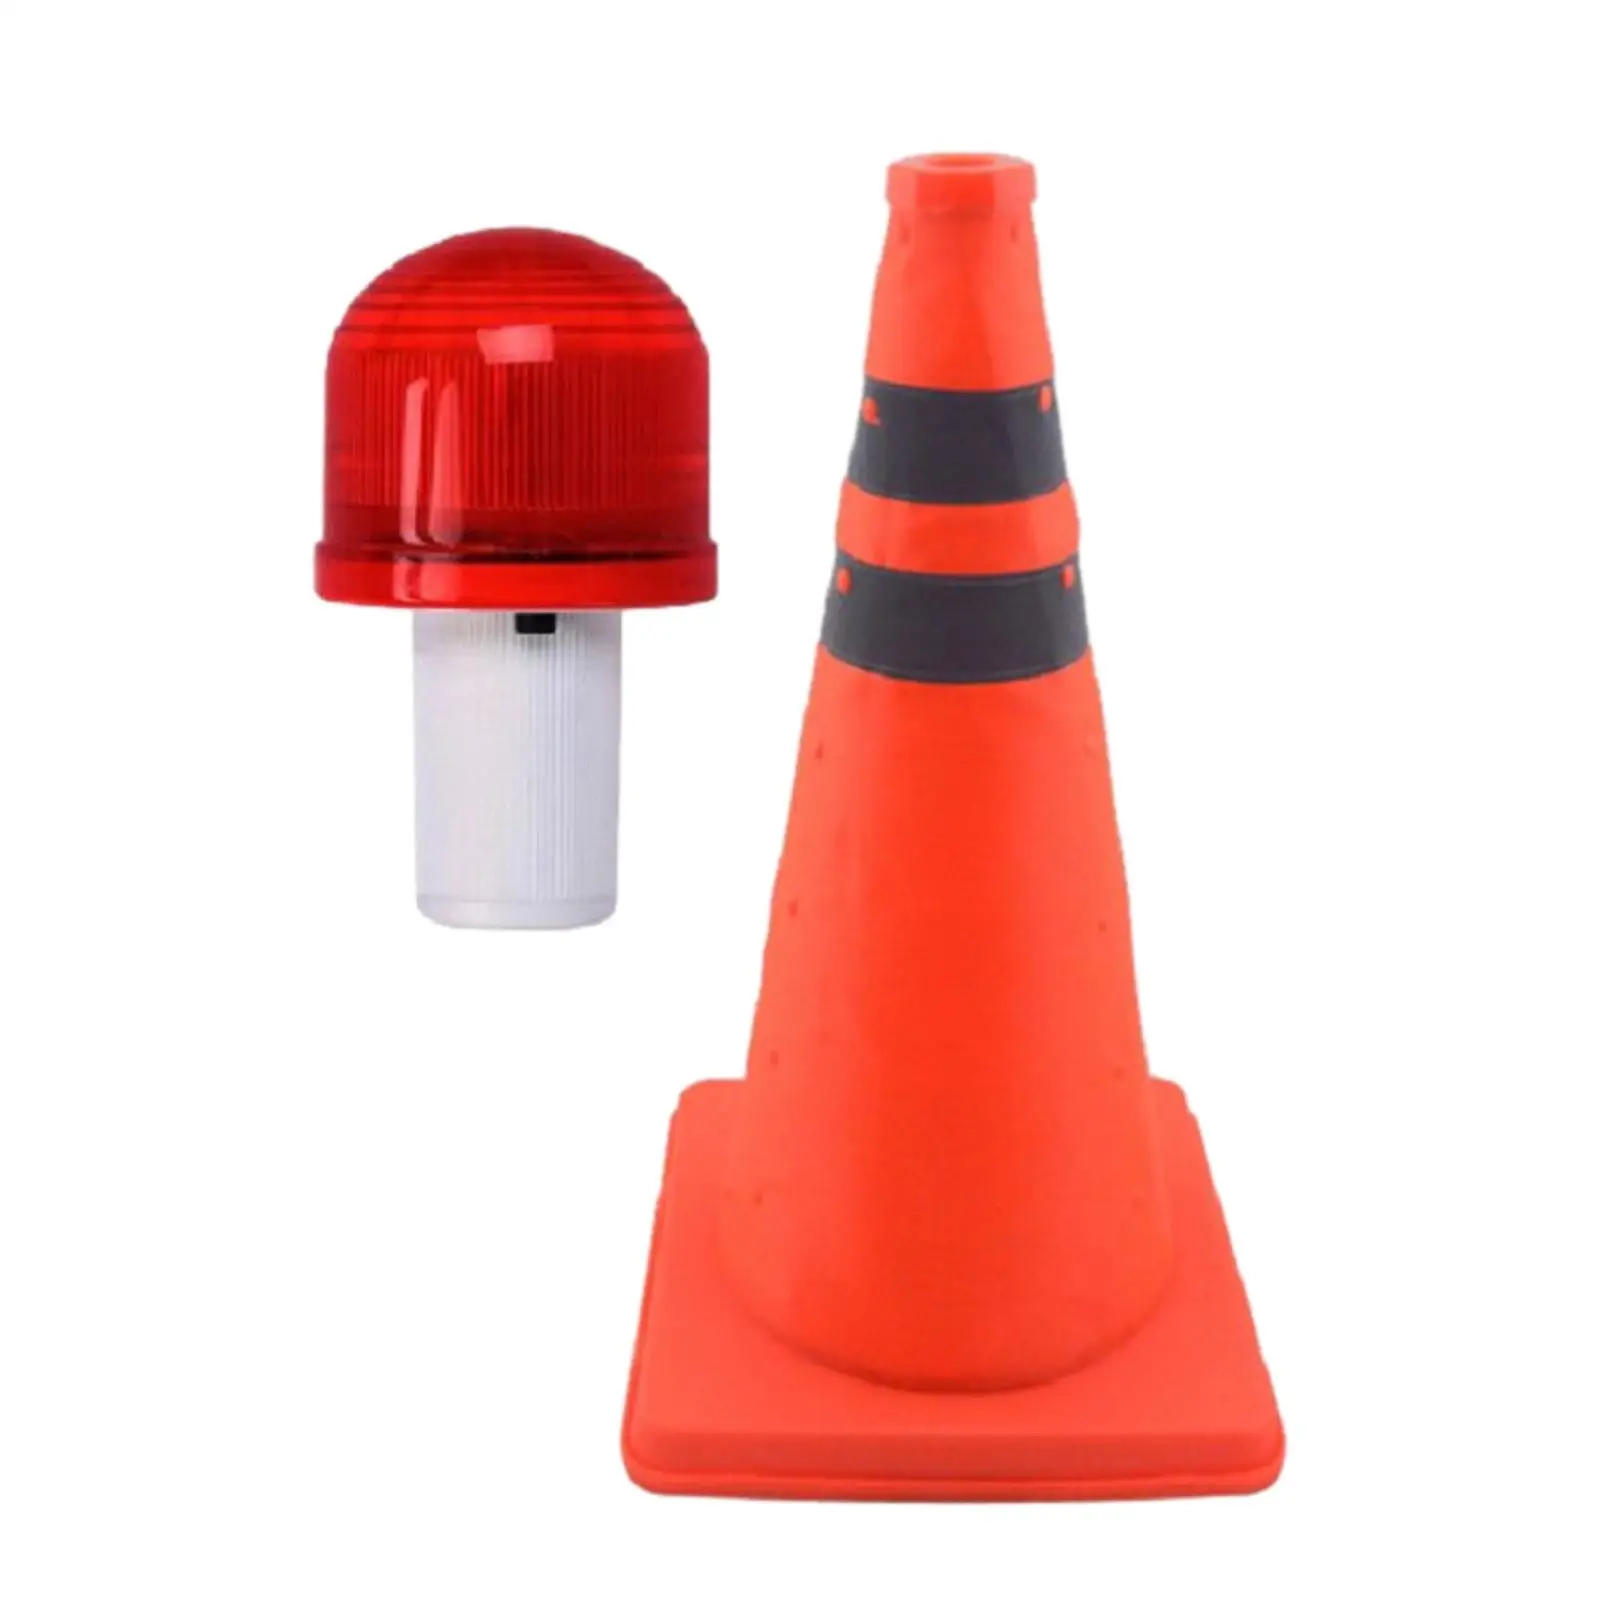 18inch Collapsible Traffic Cone with Flashing Light Multipurpose Lightweight for Parking Lots Waterproof Sturdy Accessories